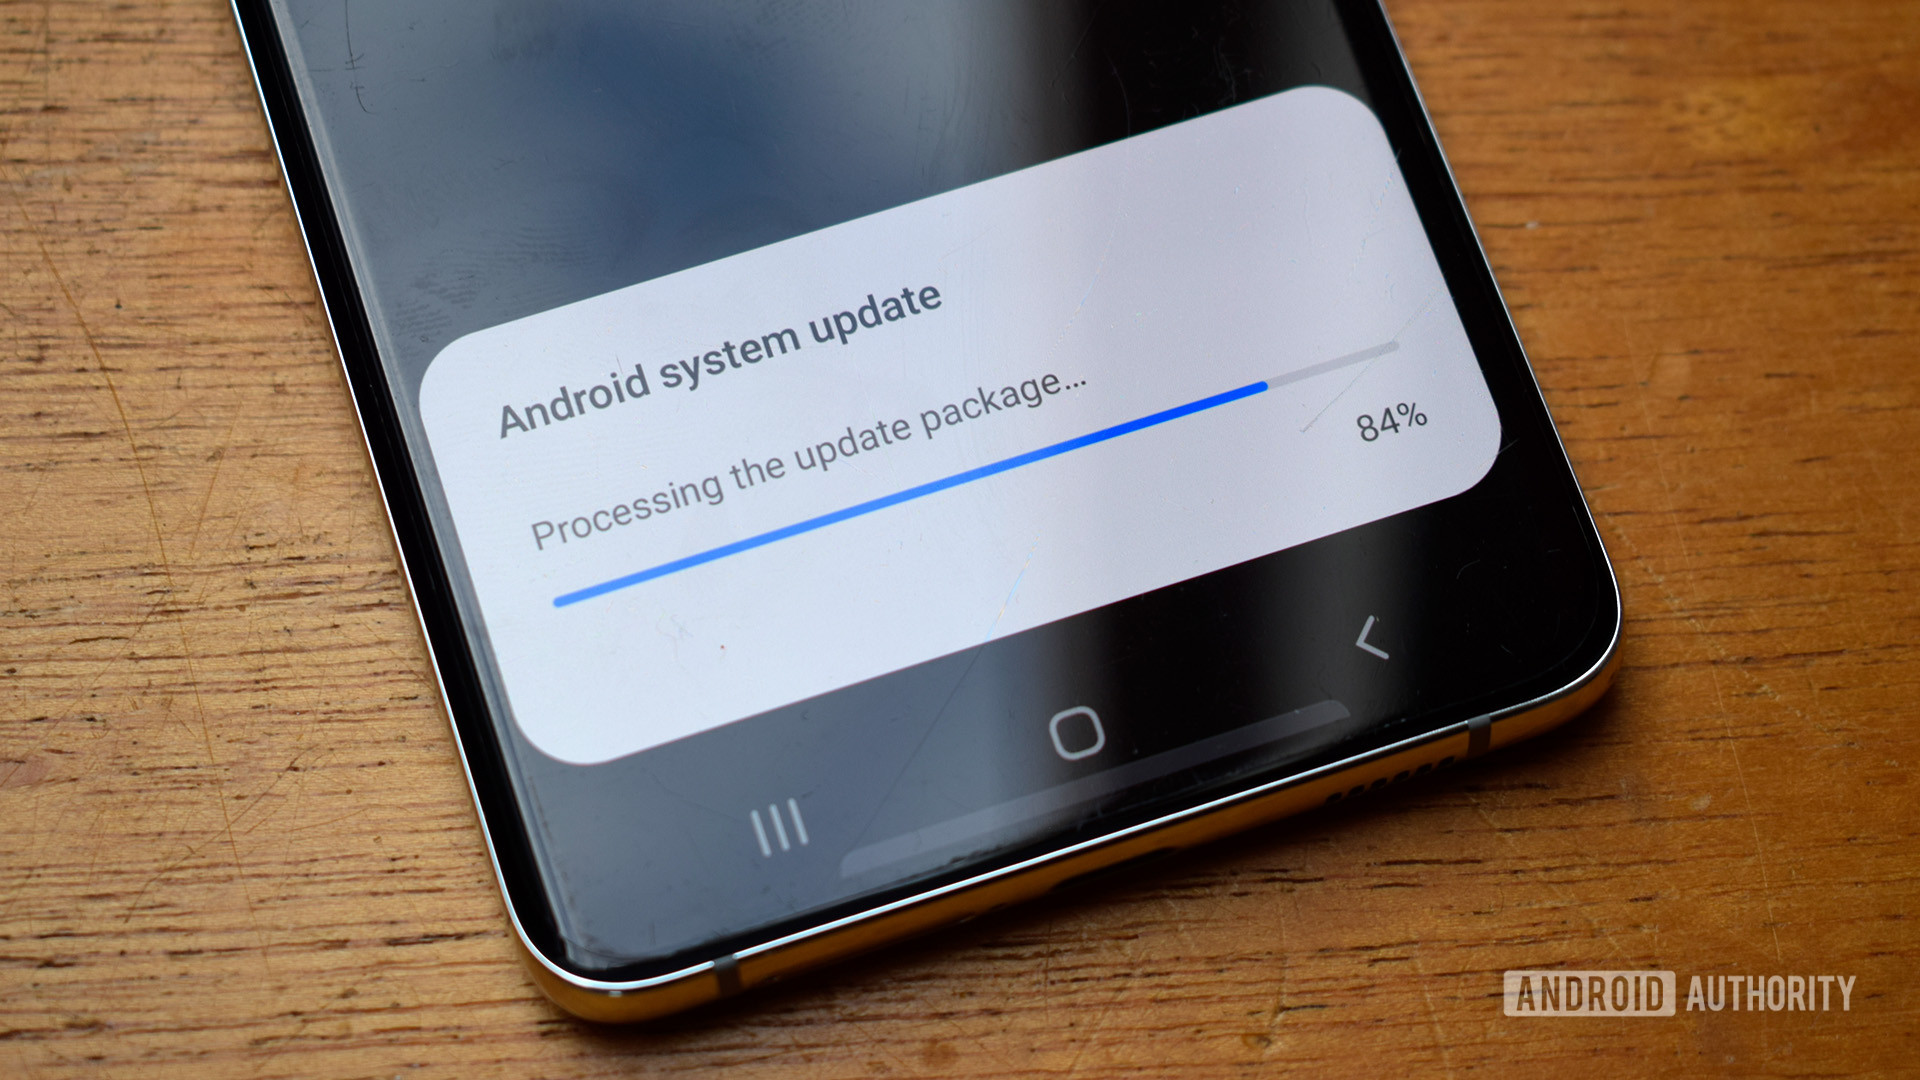 Android update installing - What to do when phone won't connect to Wi-Fi